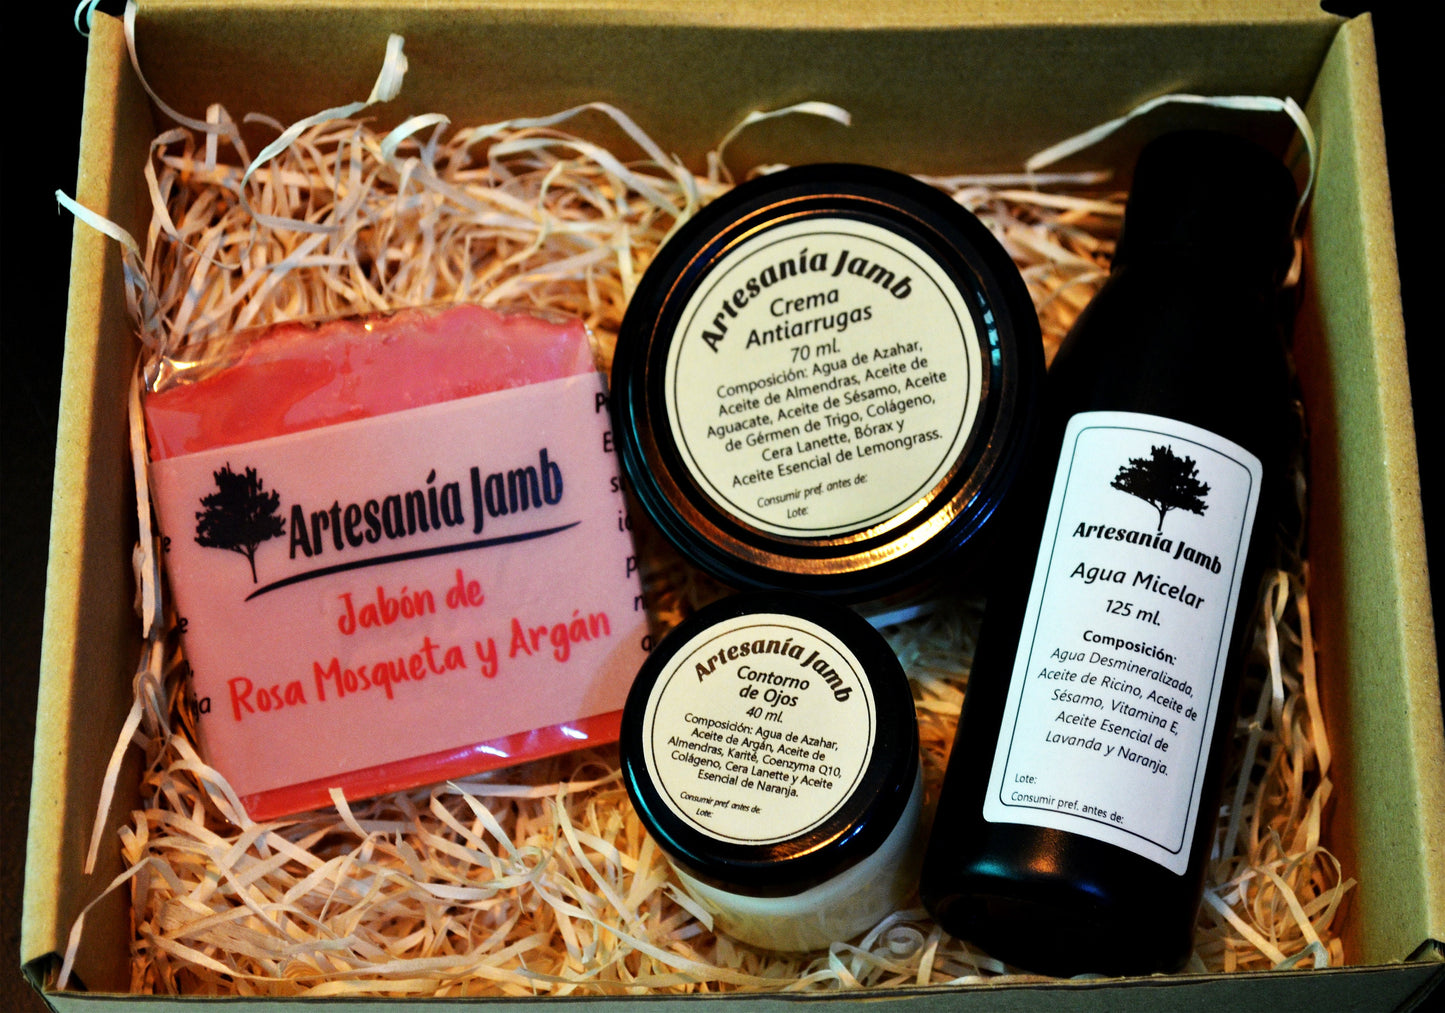 Gift Boxes, Christmas, Birthdays, Anniversary, Mother's Day, Weddings, Baptisms, Communions, Event Gift, Natural Products.